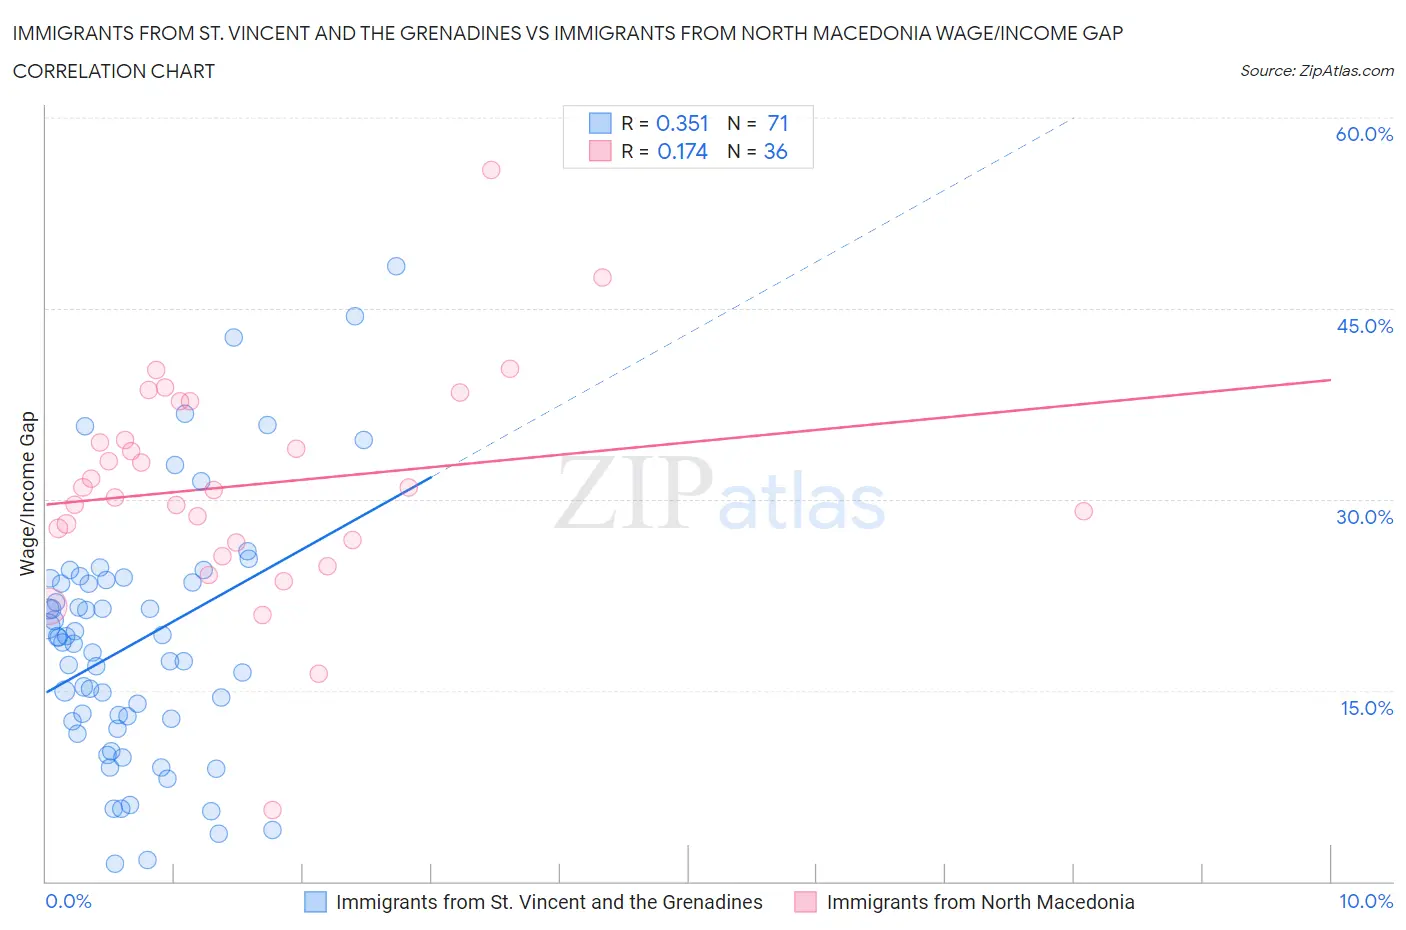 Immigrants from St. Vincent and the Grenadines vs Immigrants from North Macedonia Wage/Income Gap